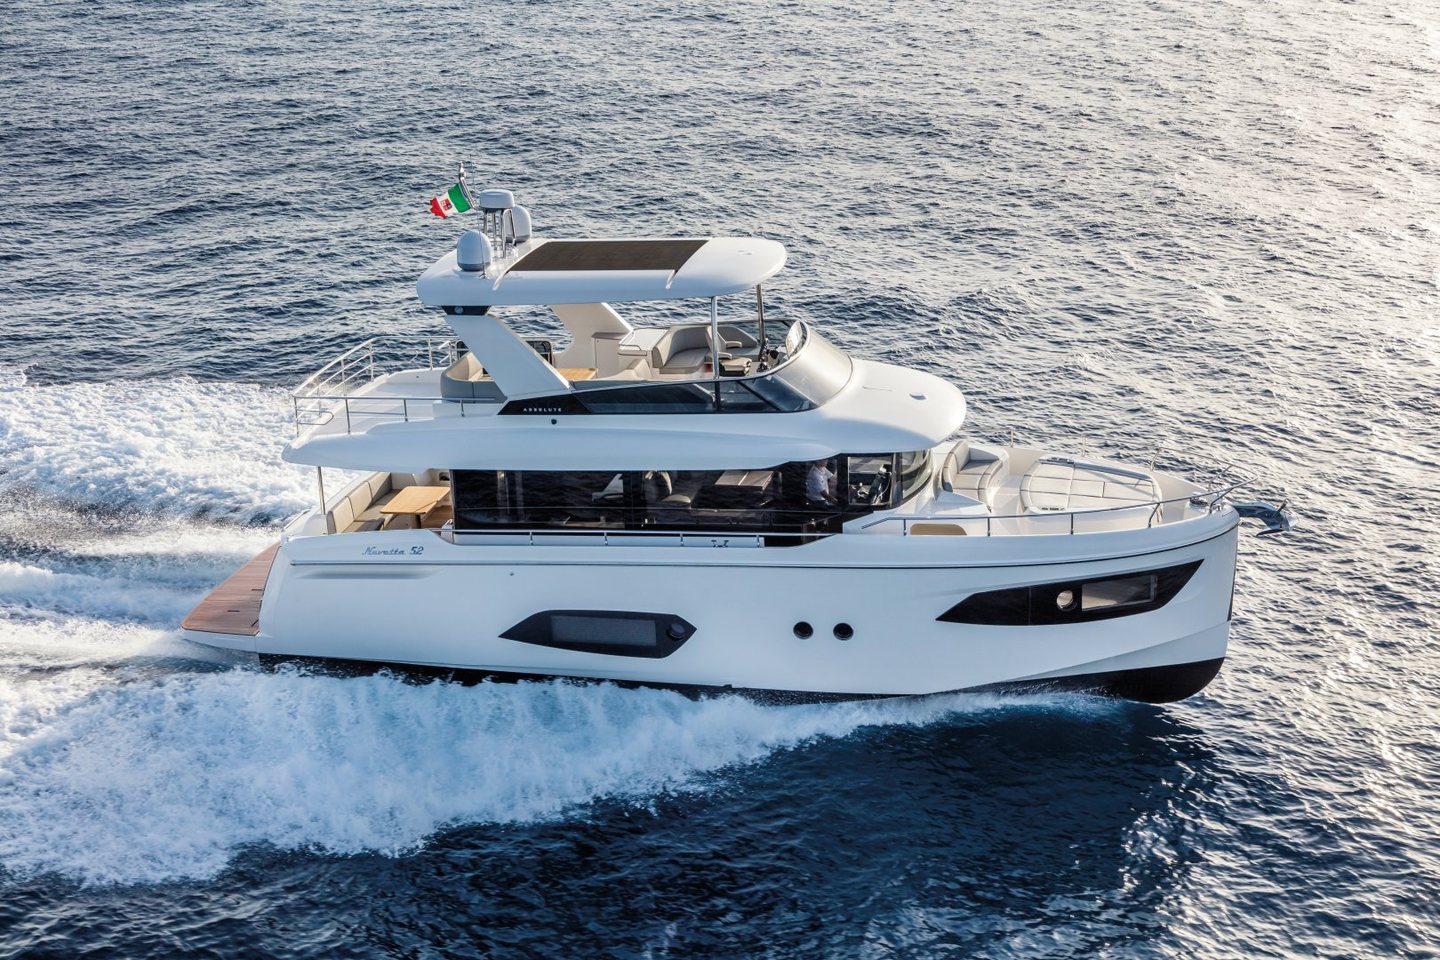 360 VR Virtual Tours of the Absolute Navetta 52